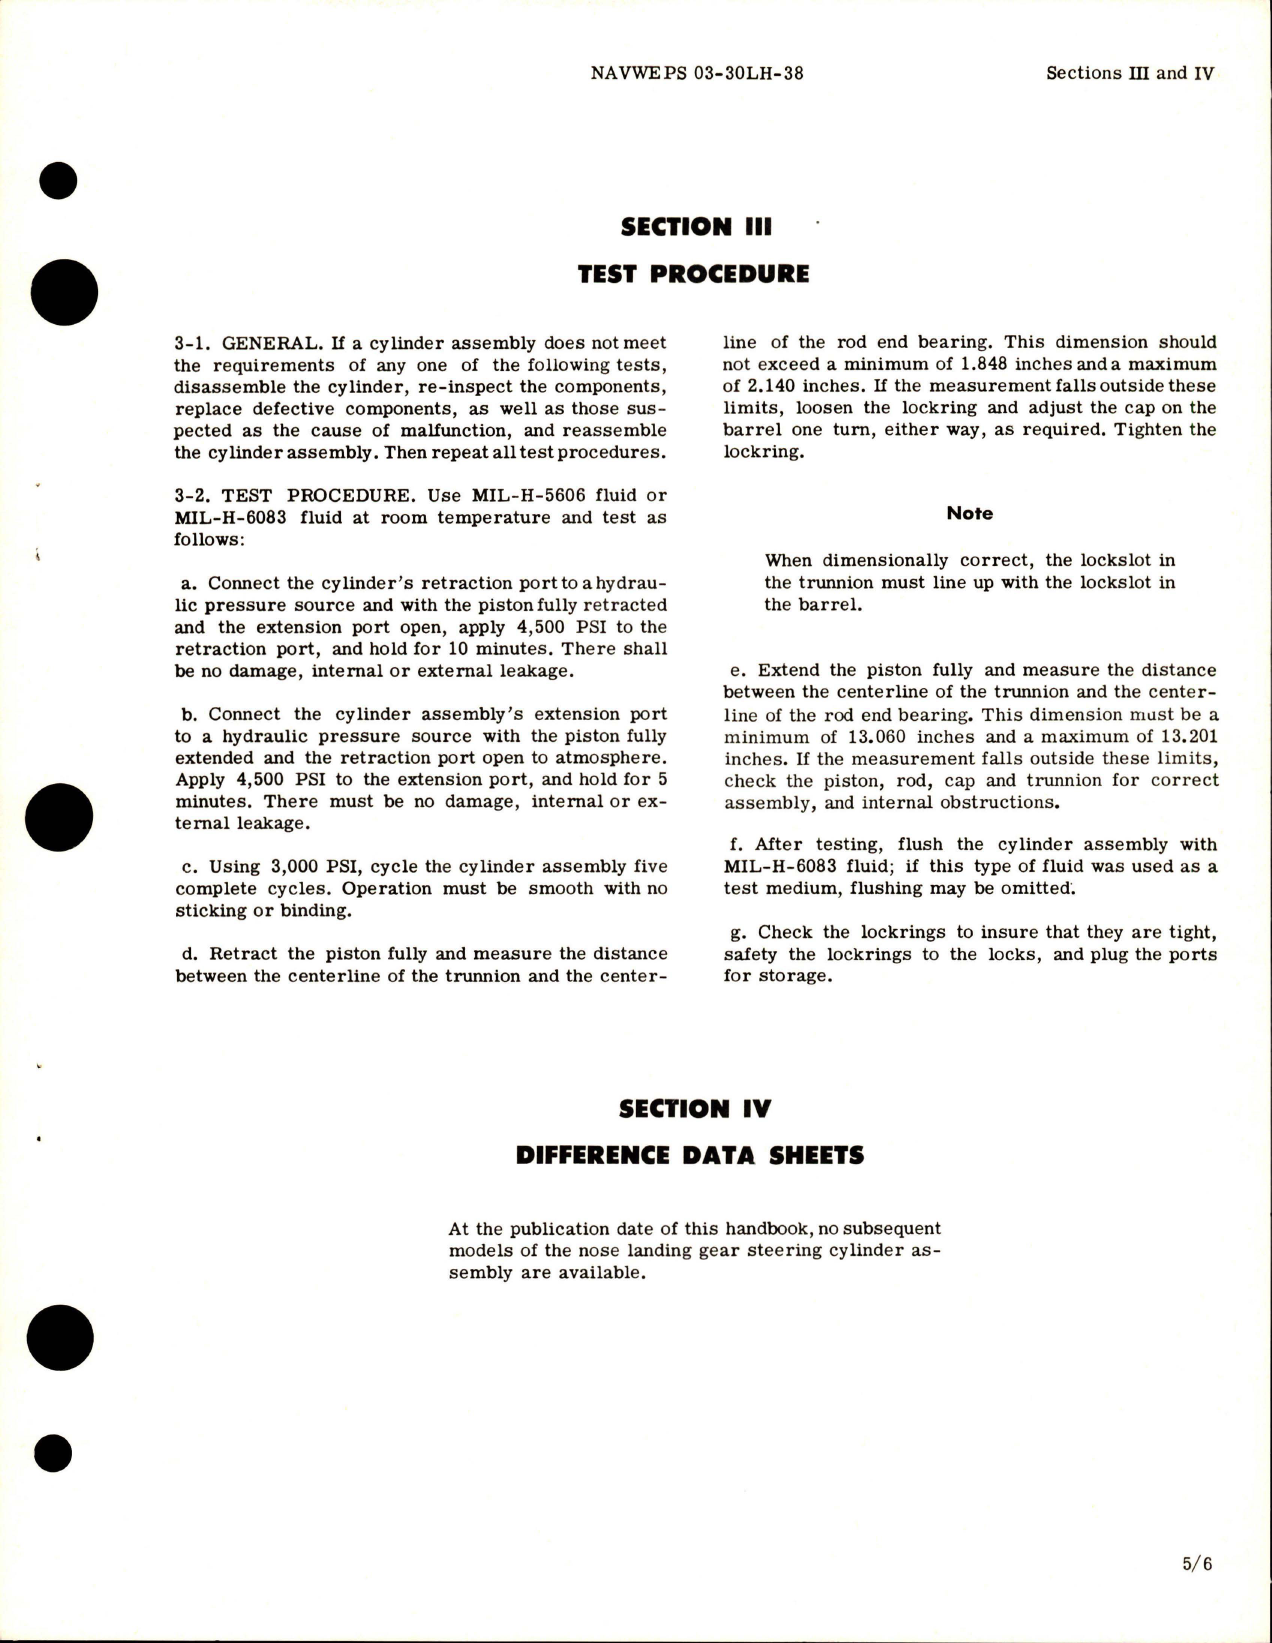 Sample page 5 from AirCorps Library document: Overhaul Instructions for Nose Landing Gear Steering Cylinder Assembly - Part 695568-1